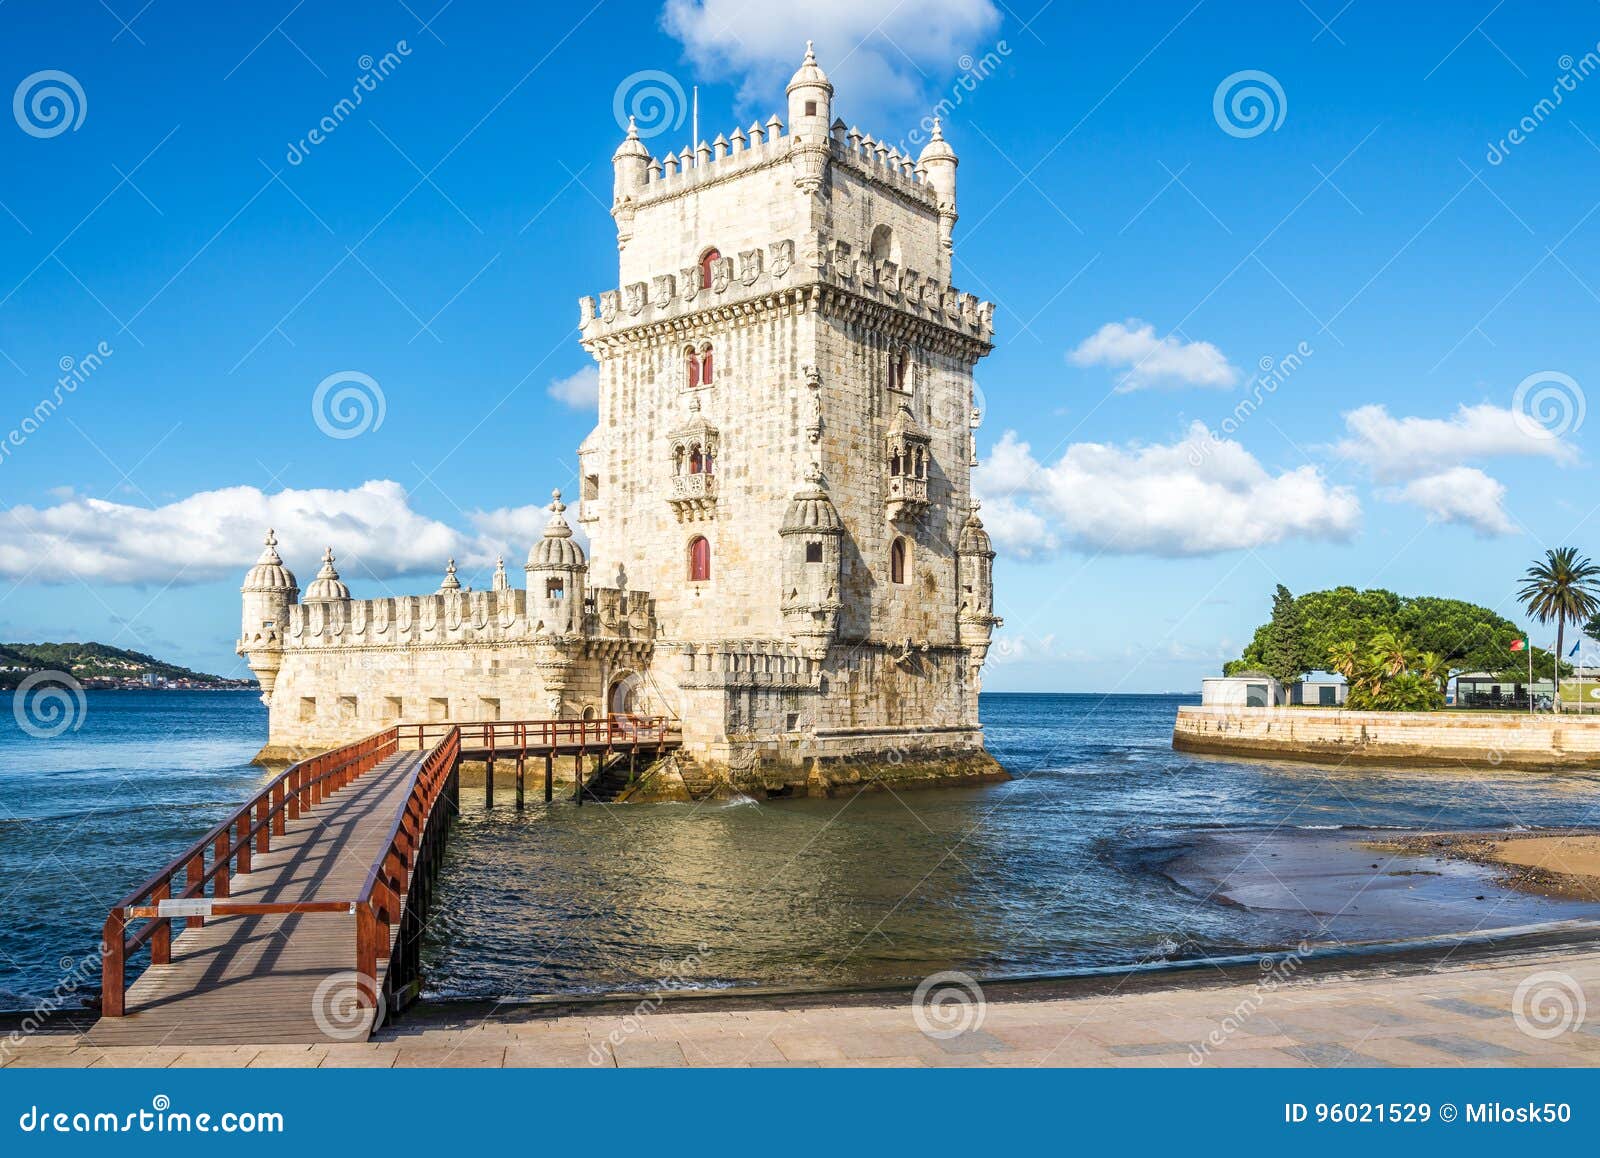 view at the belem tower at the bank of tejo river in lisbon , portugal